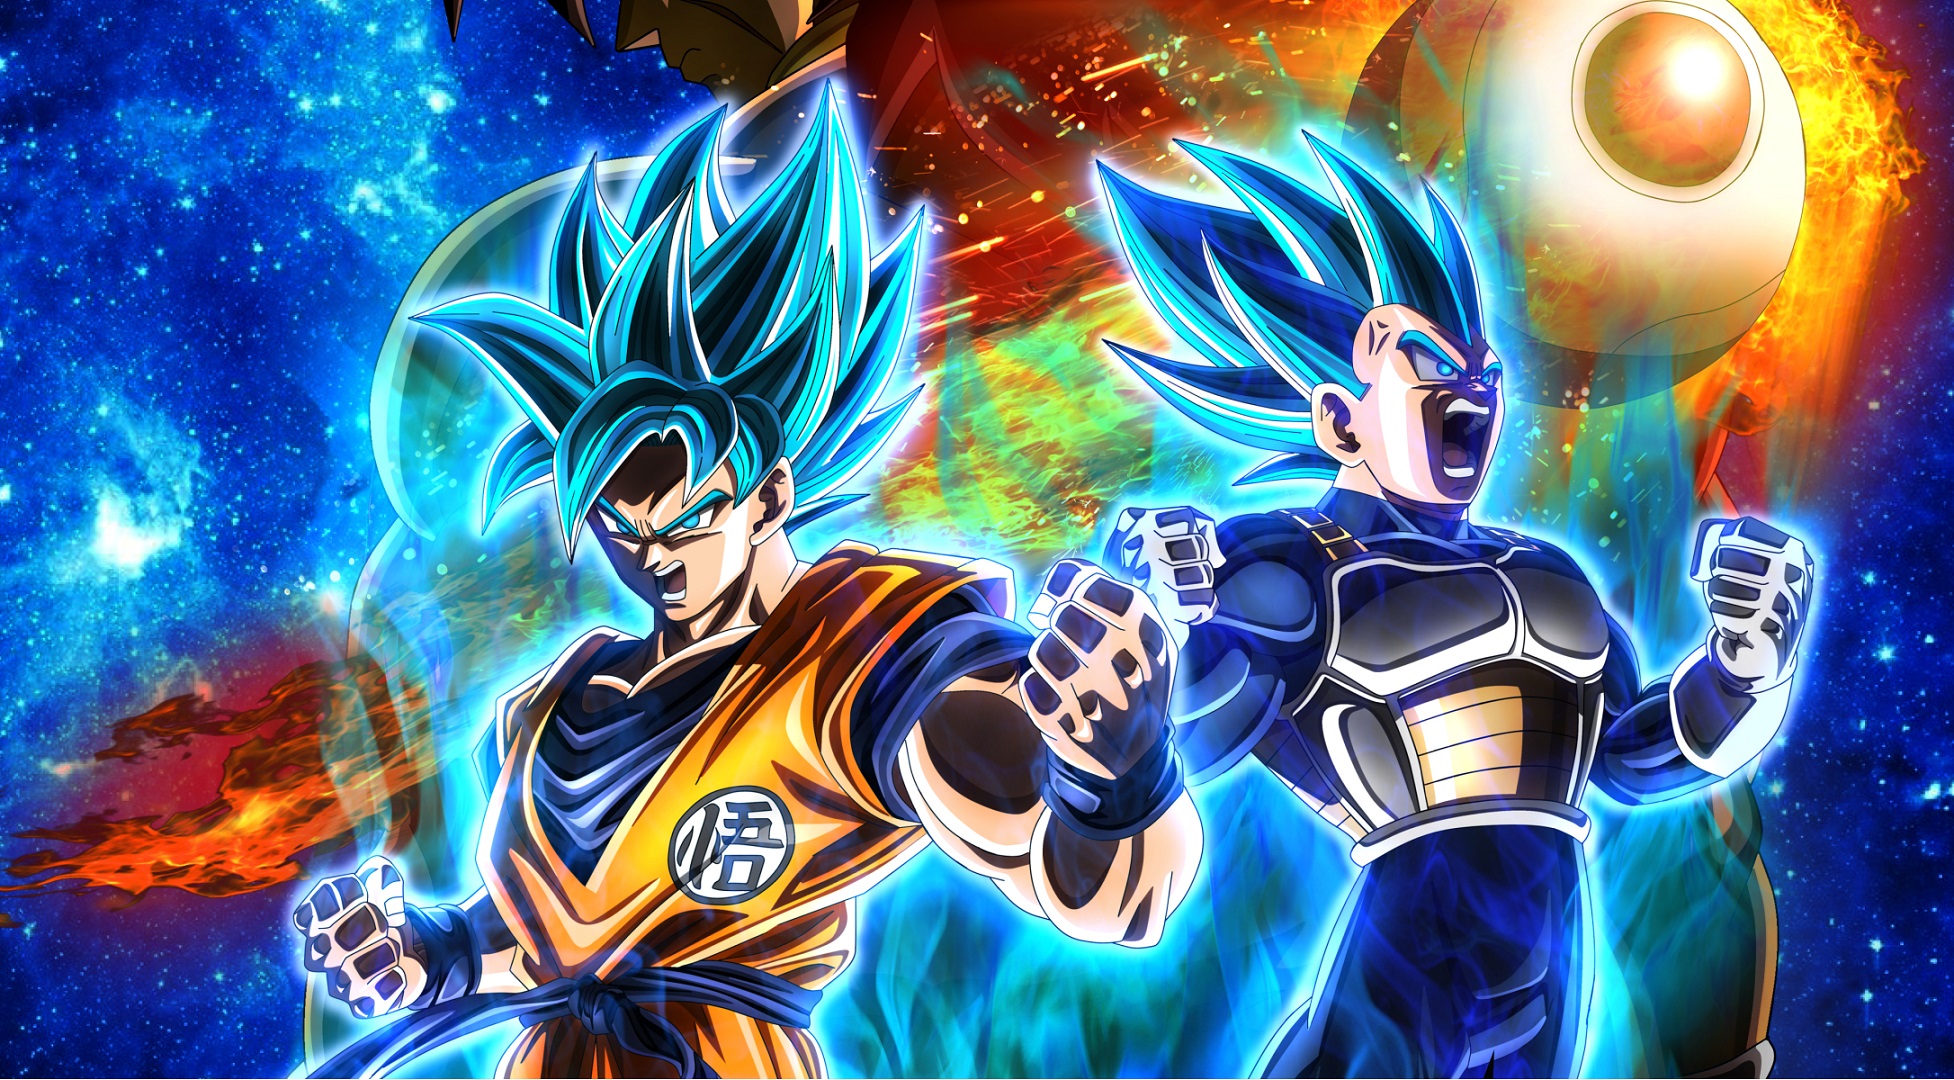 Dragon Ball Super: Broly' Review: Most Action-Packed Film in the Series